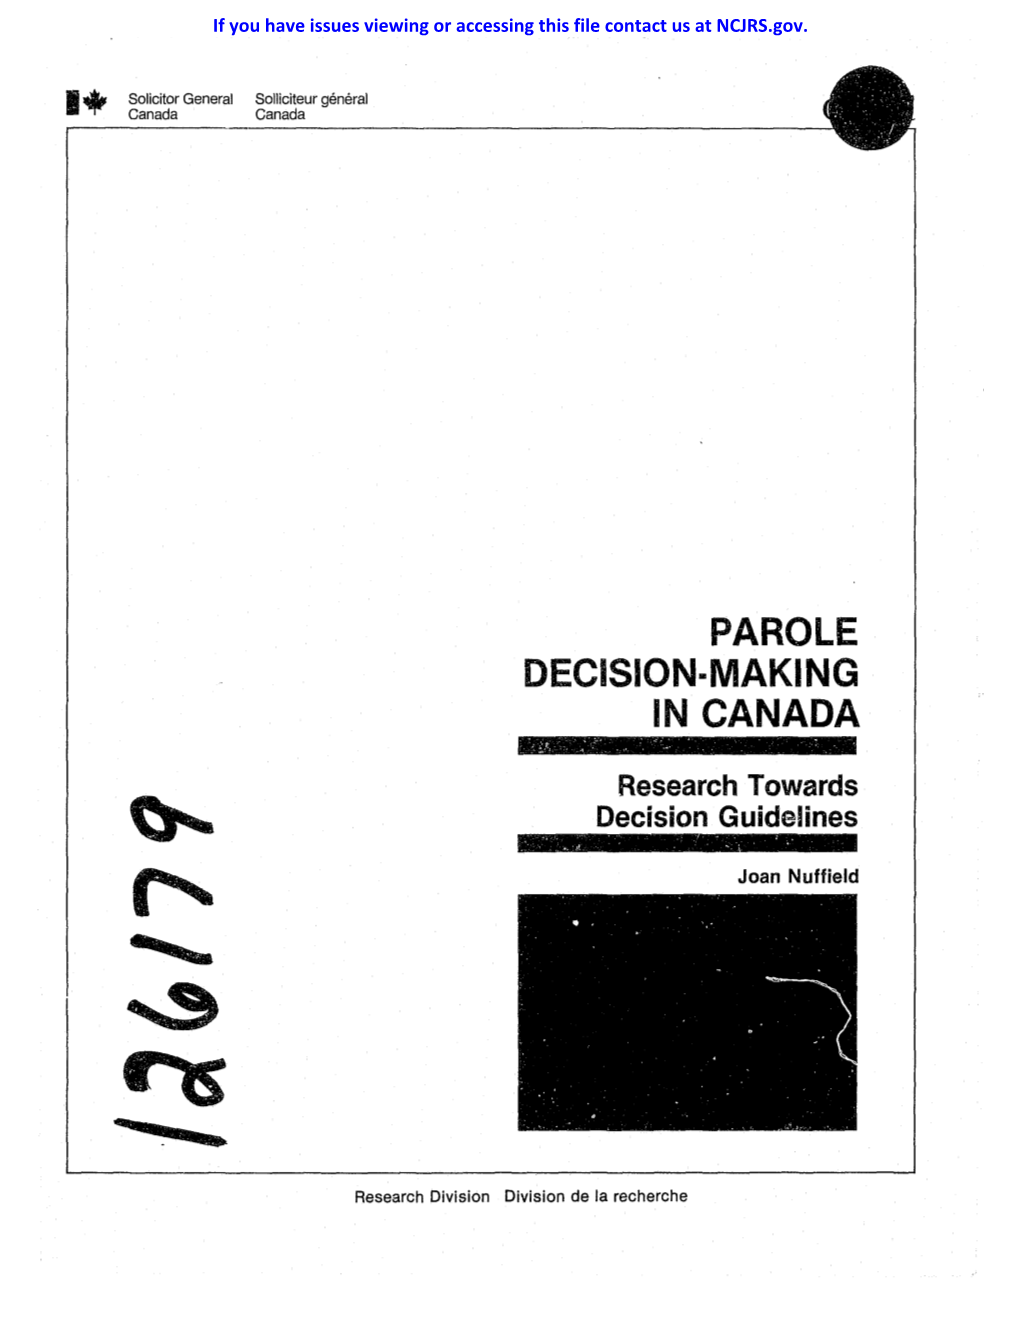 PAROLE DECISION-MAKING in CANADA Research Towards